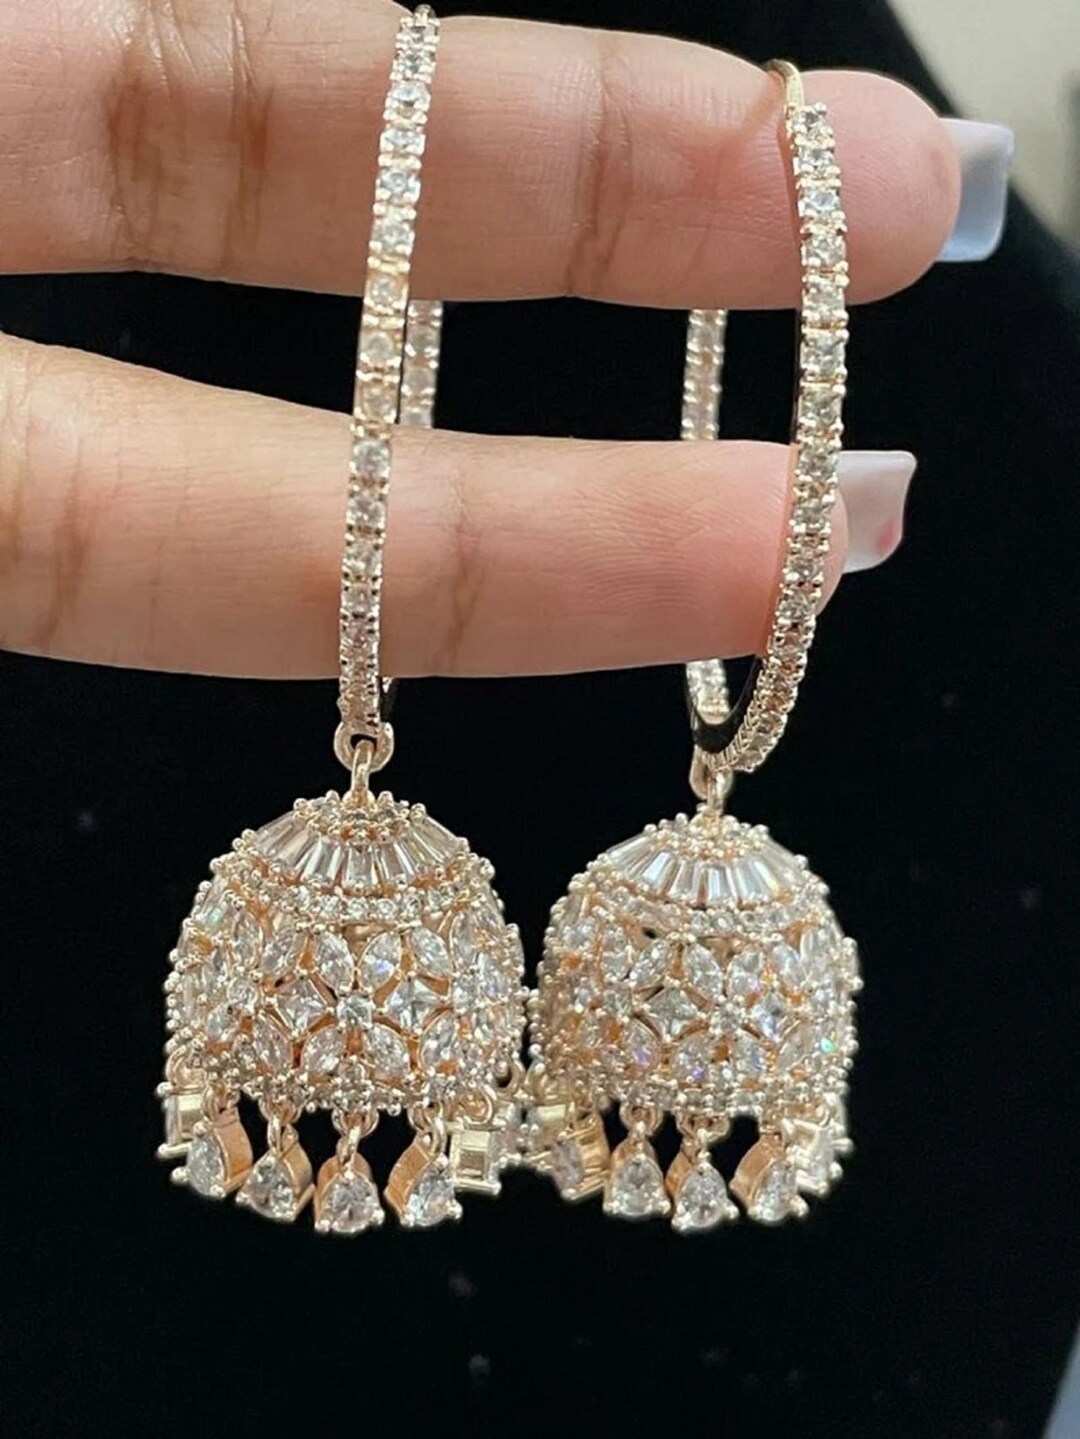 American Diamond Earrings For All Party Outfits | American diamond, Buy  earrings online, Diamond earrings